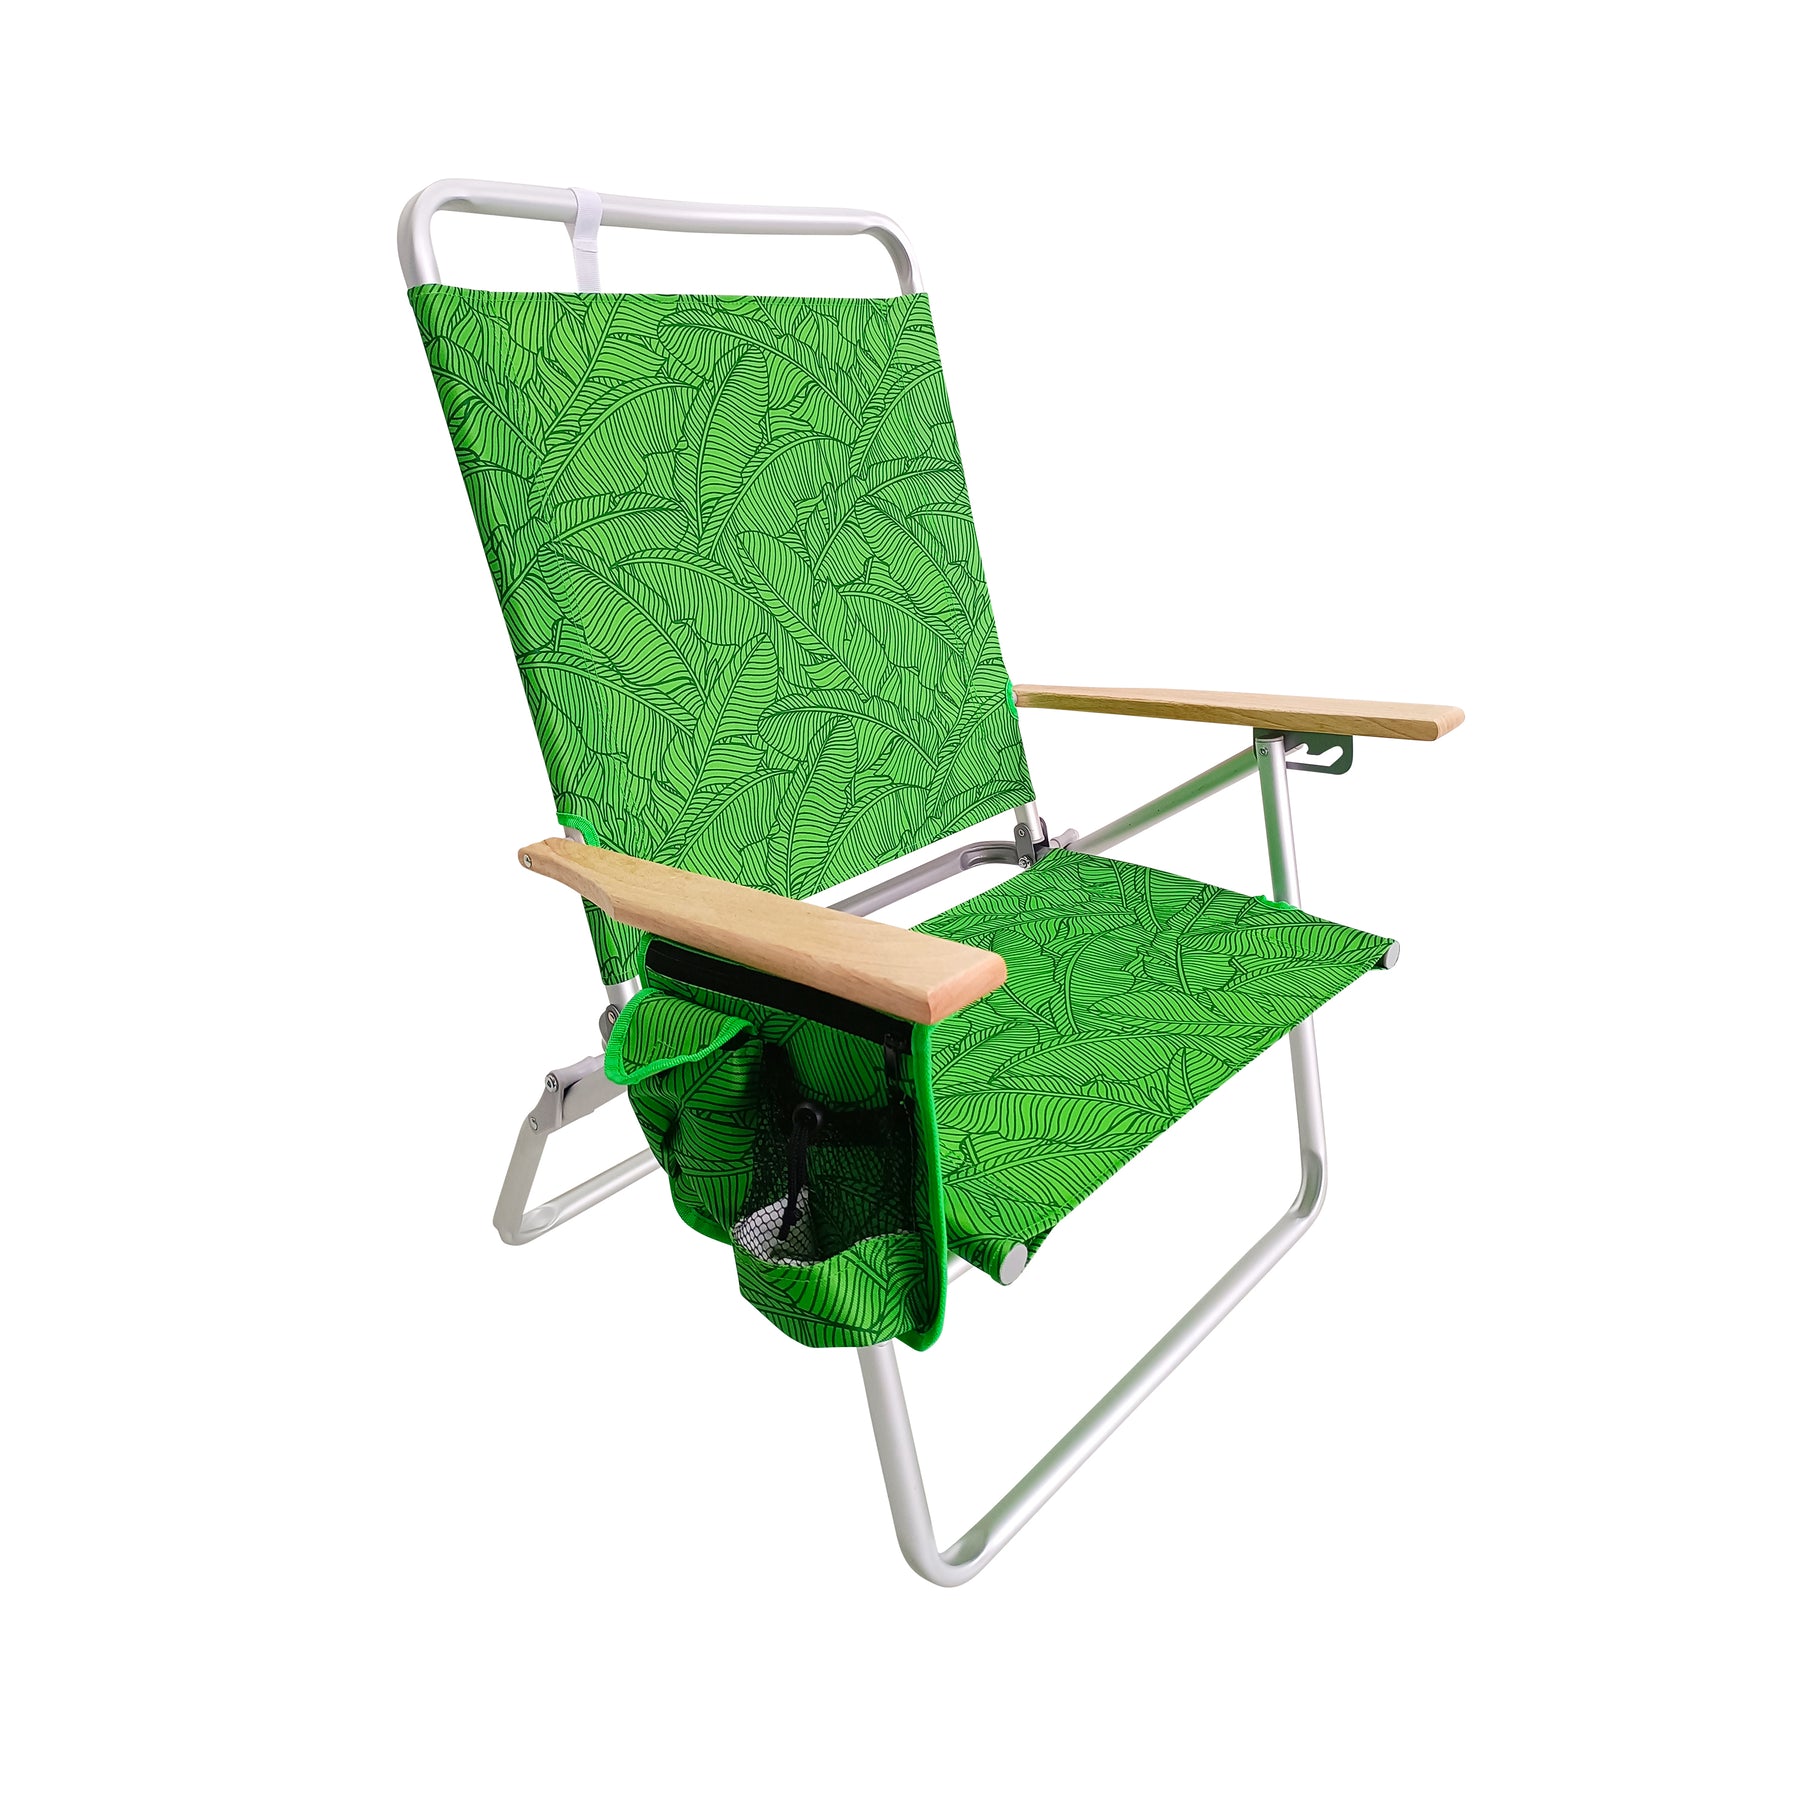 Bliss Hammocks Foldable Beach Chair with Side Pocket, 3 Reclining Positions, Storage Pouch, Phone Holder, Cup Holder, and Shoulder Strap. Green Banana Leaves variation is a green color with a light green banana leaf pattern.